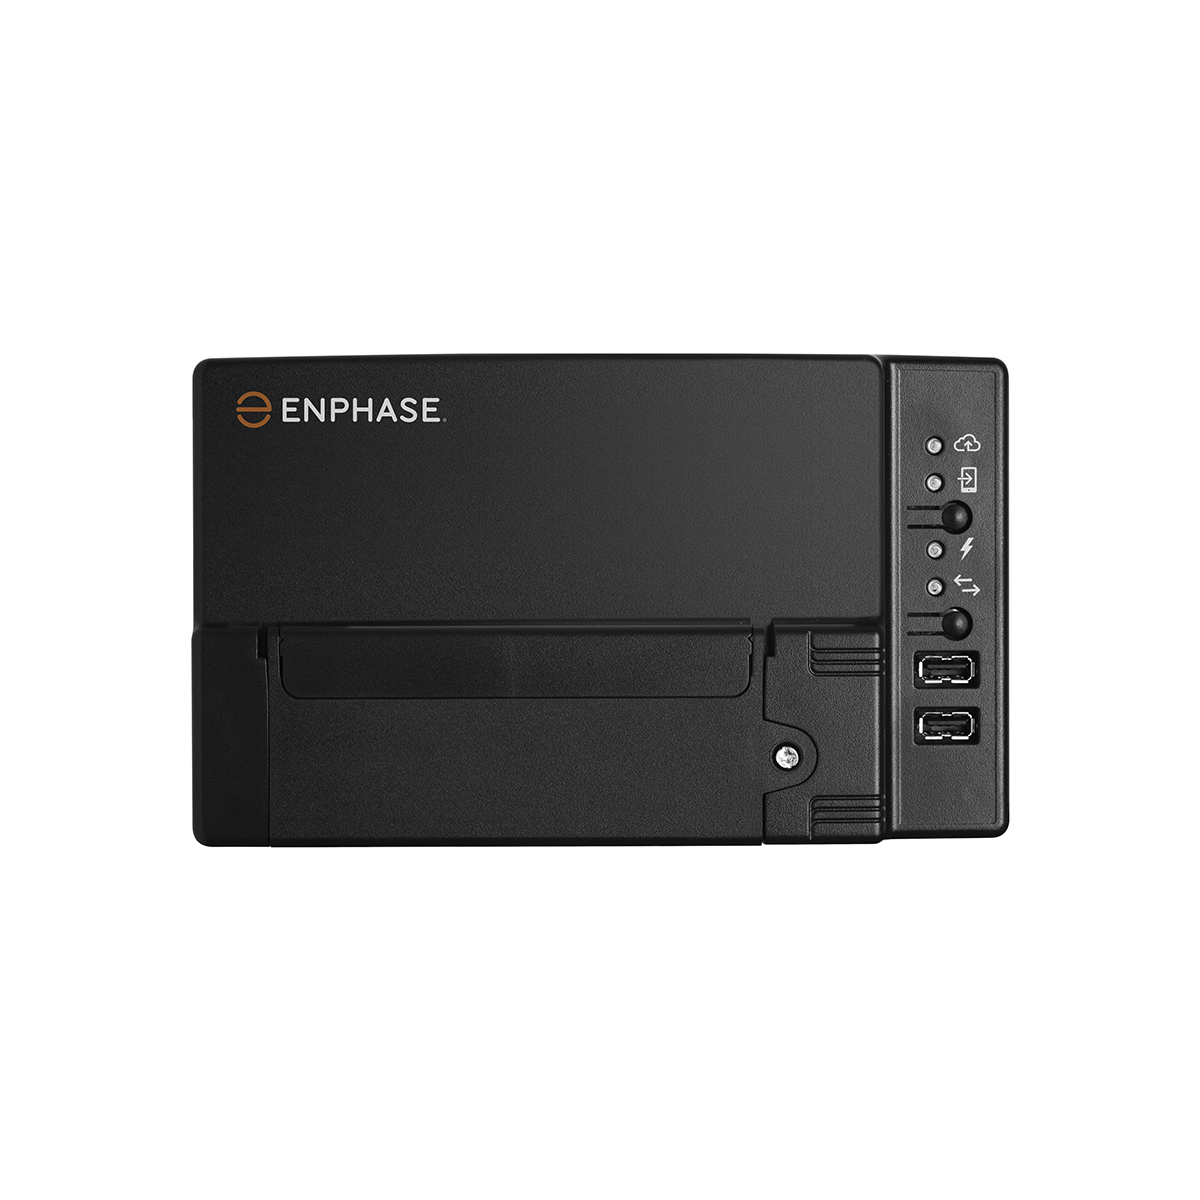 28x Sunpower P6 11340 wp met Enphase IQ8A en Accu 1x N Charge 10T,1 x N Charge 3T